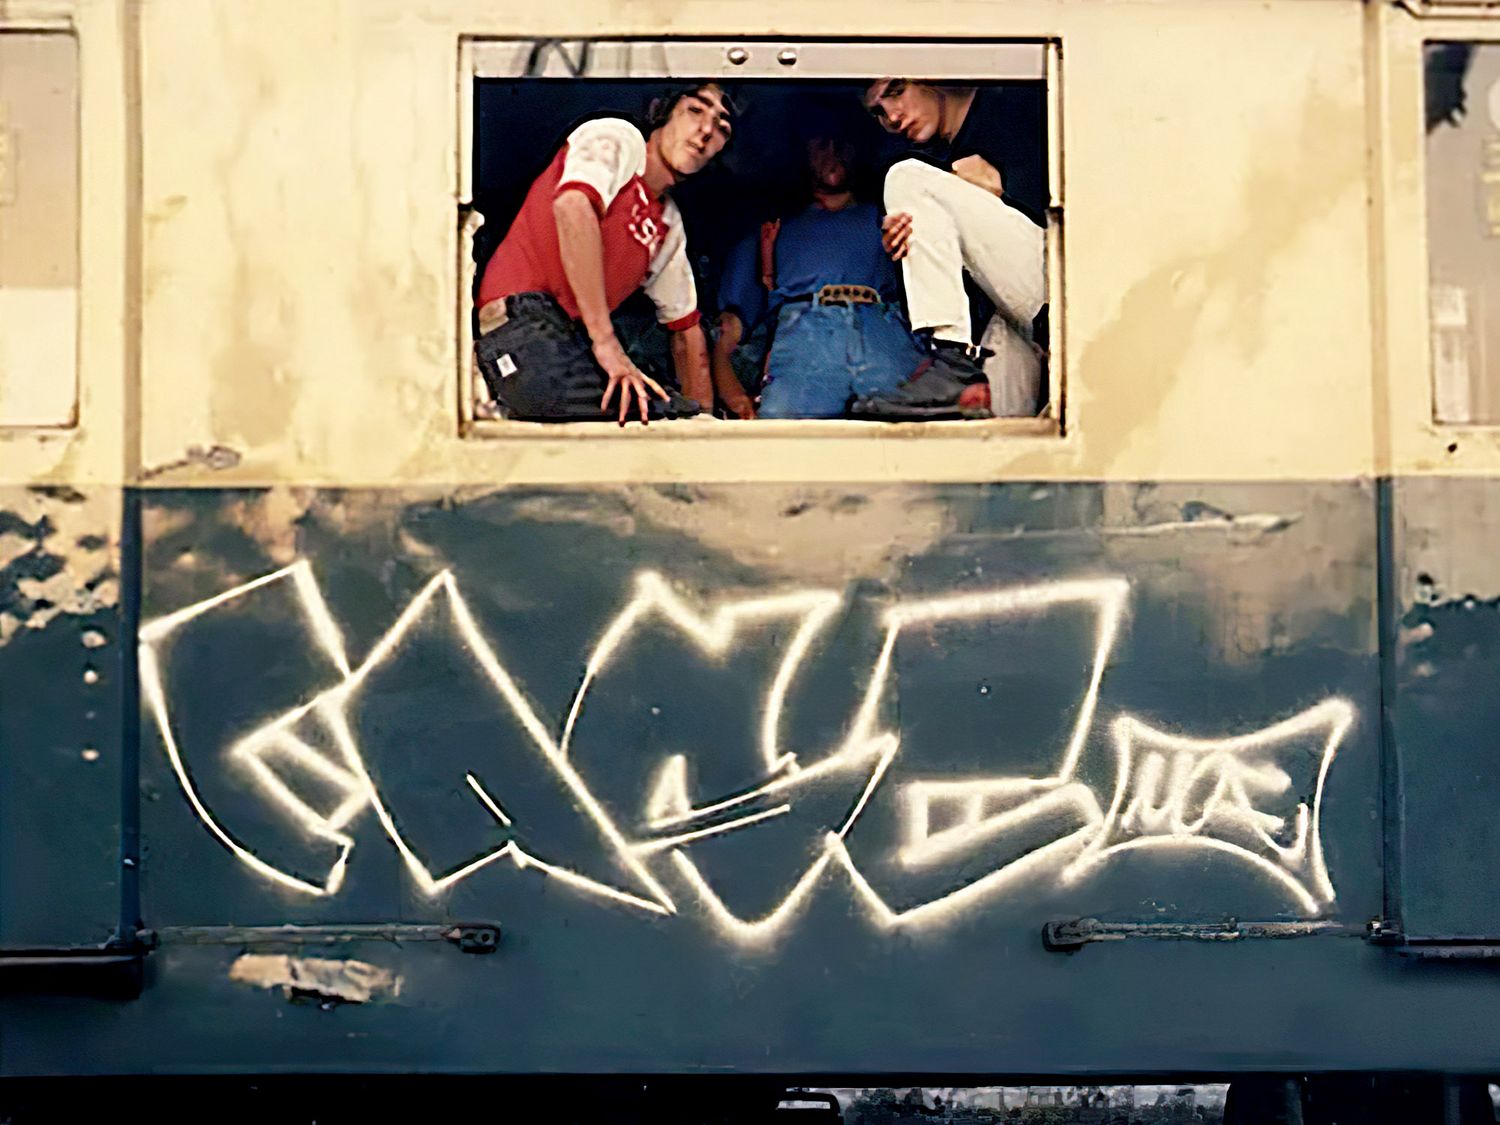 The kids of Barcelona in the 80's, including Fase who became Fasim, were inspired at the time by "Wild Style" and "Subway Art" to create their first letters (©Barcelona Showdown).